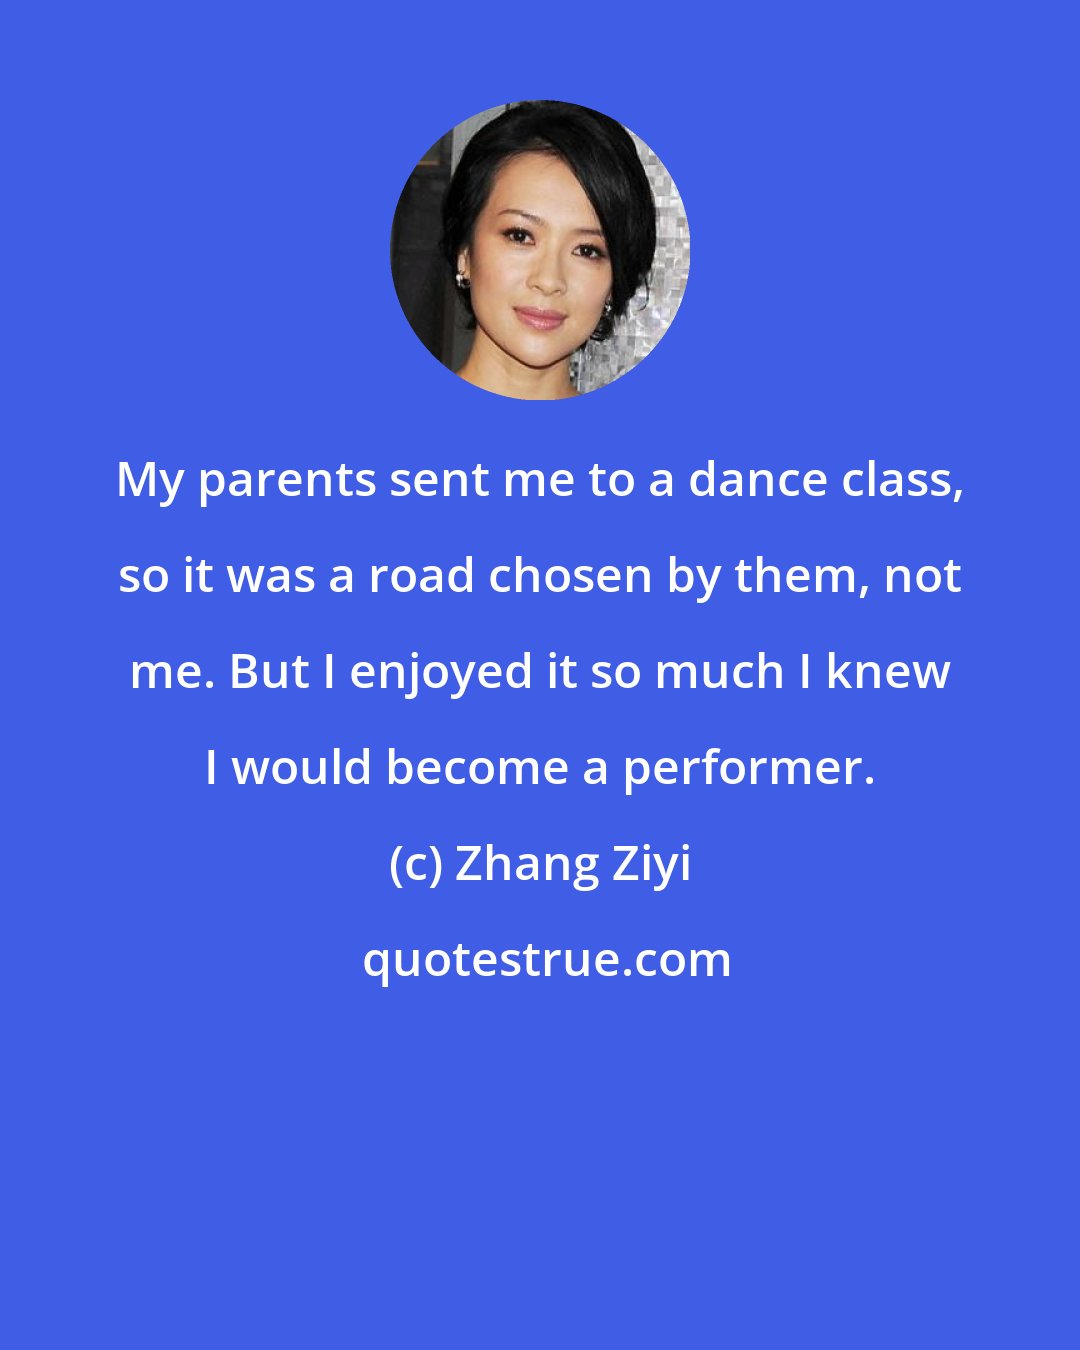 Zhang Ziyi: My parents sent me to a dance class, so it was a road chosen by them, not me. But I enjoyed it so much I knew I would become a performer.